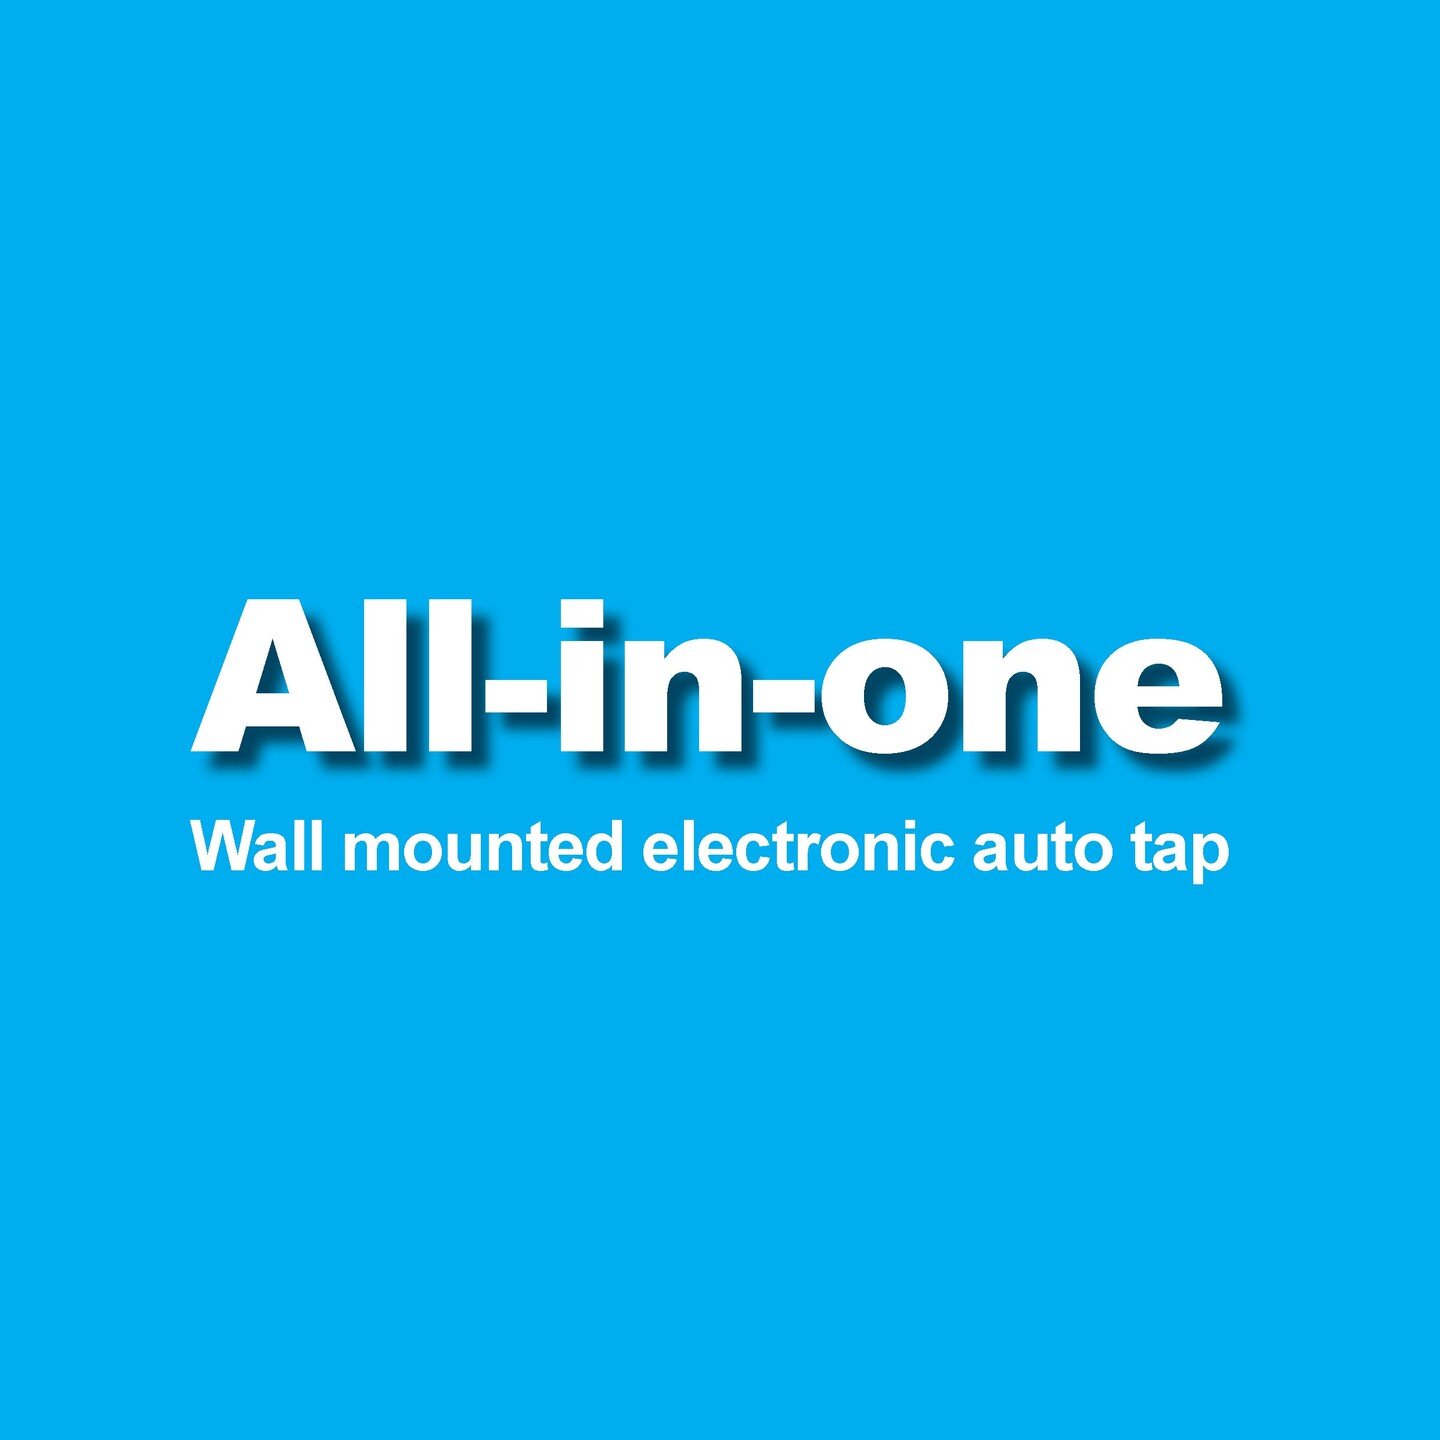 Our all-in-one wall mounted Electronic Handsfree Sensor Operated Tap in Stainless Steel Plate is ideal for Hospitals, Aged Care, Hotels, Schools, Stadiums, and Restaurants.

For more information call us on
(03) 9399 8444 or send
us an email on sales@